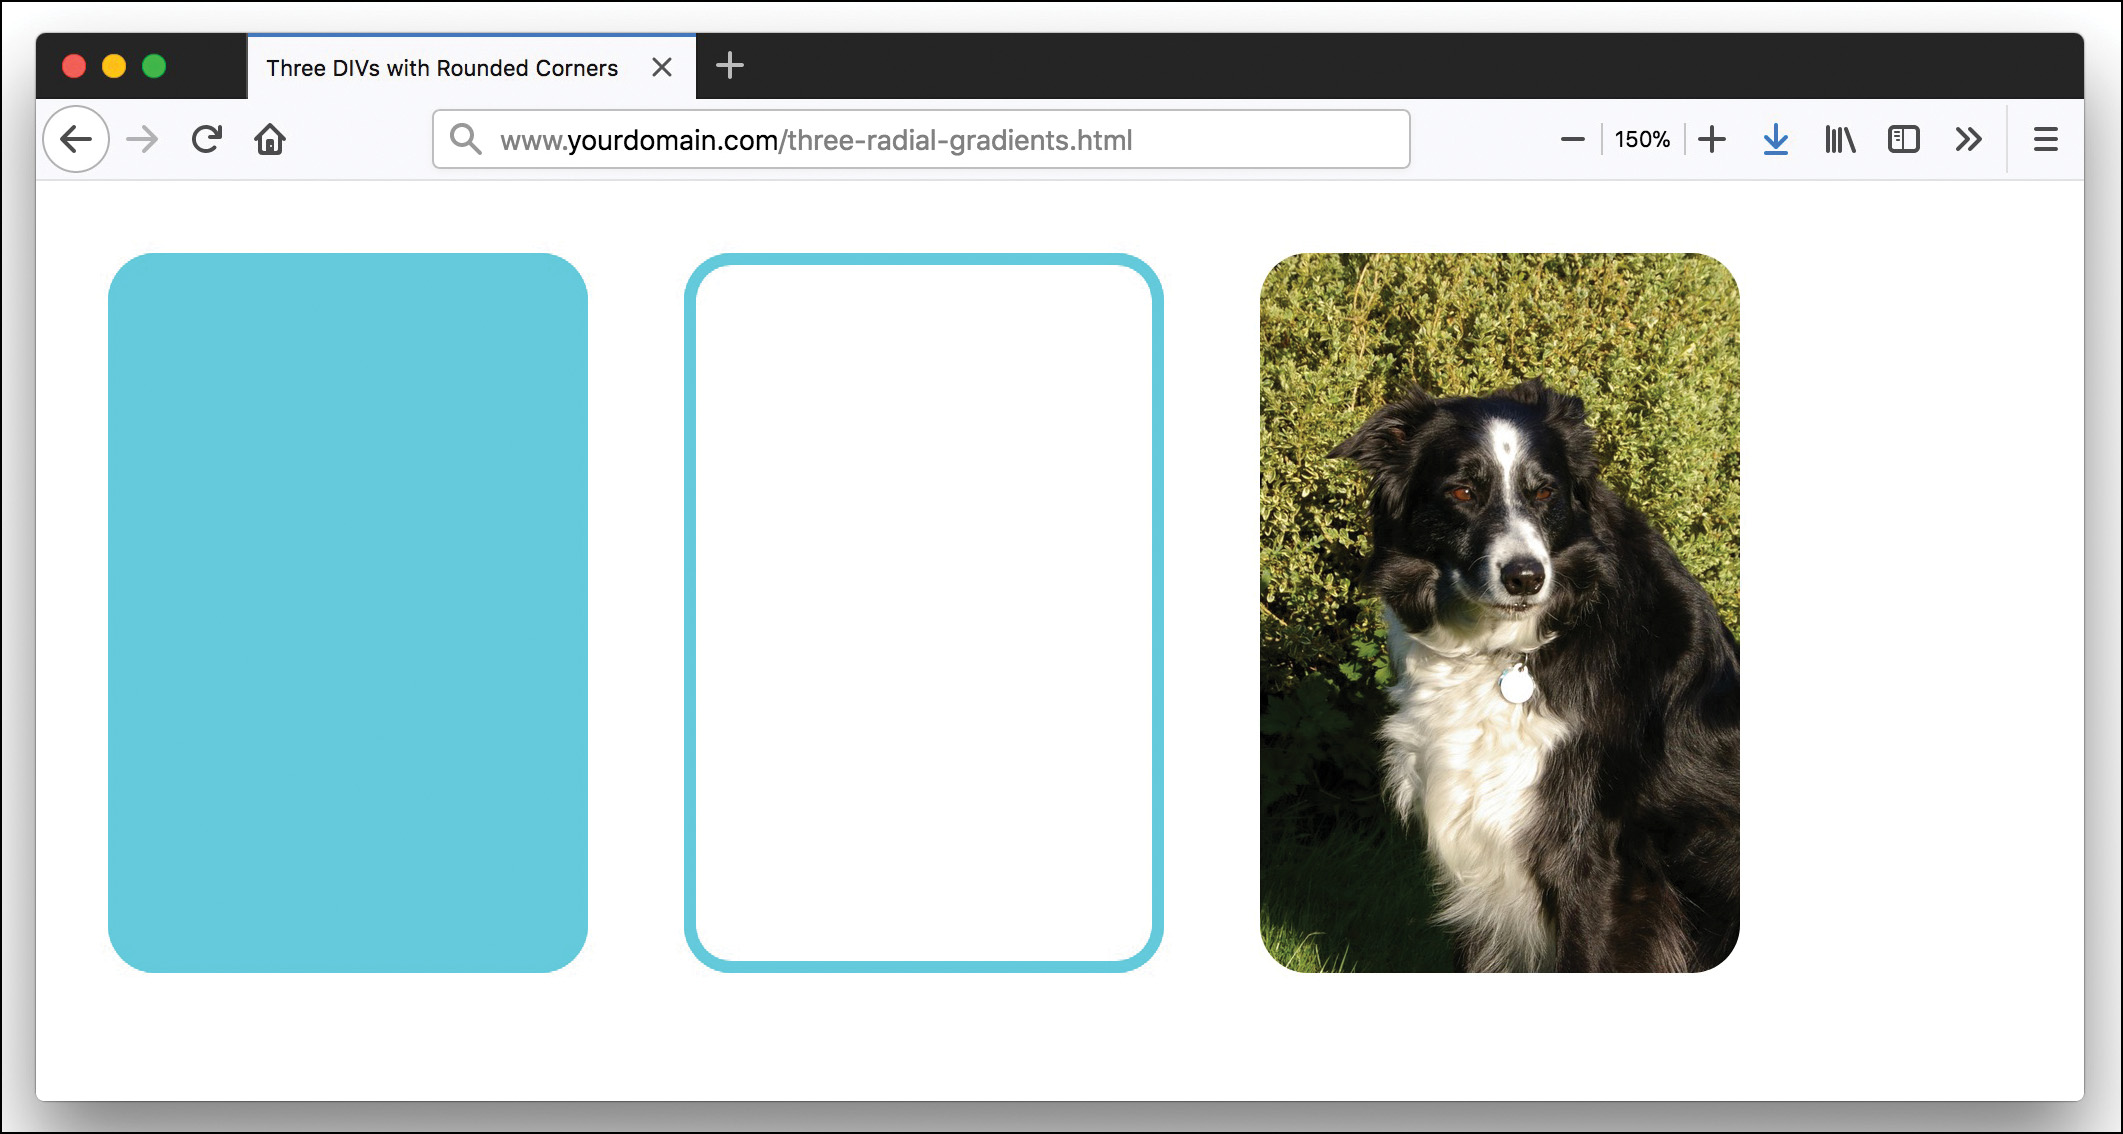 A screenshot shows three <div> elements. All three elements have rounded corners. The first element is filled with a background color, the second element is empty but has a colored border, and the third element has a background image of a dog. 